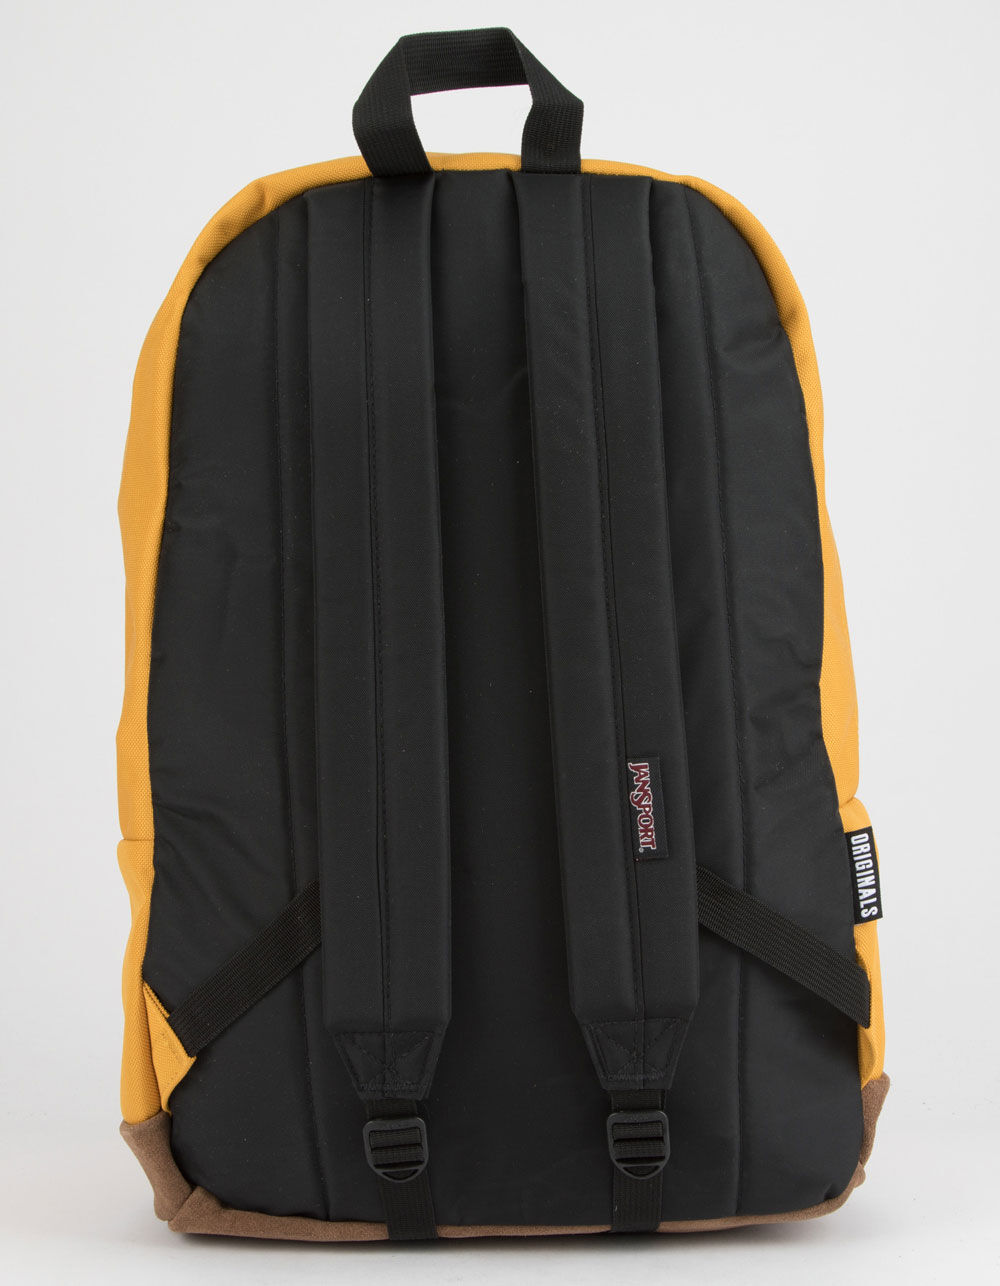 JANSPORT Right Pack English Mustard Backpack image number 2